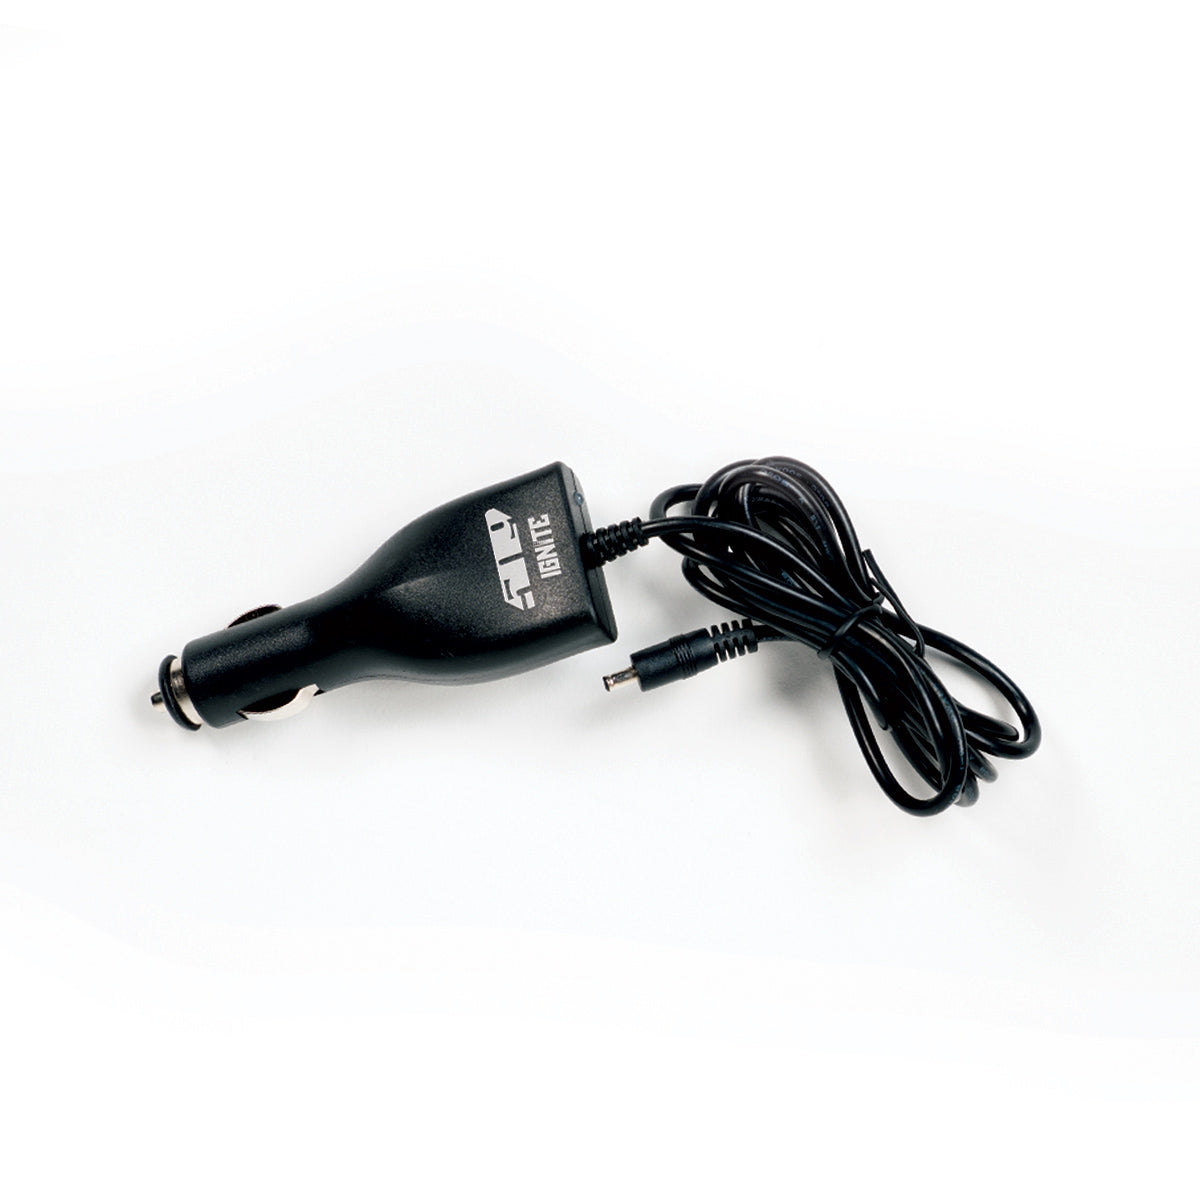 12 Volt Charger for Ignite Batteries - F02005200 - The Parts Lodge